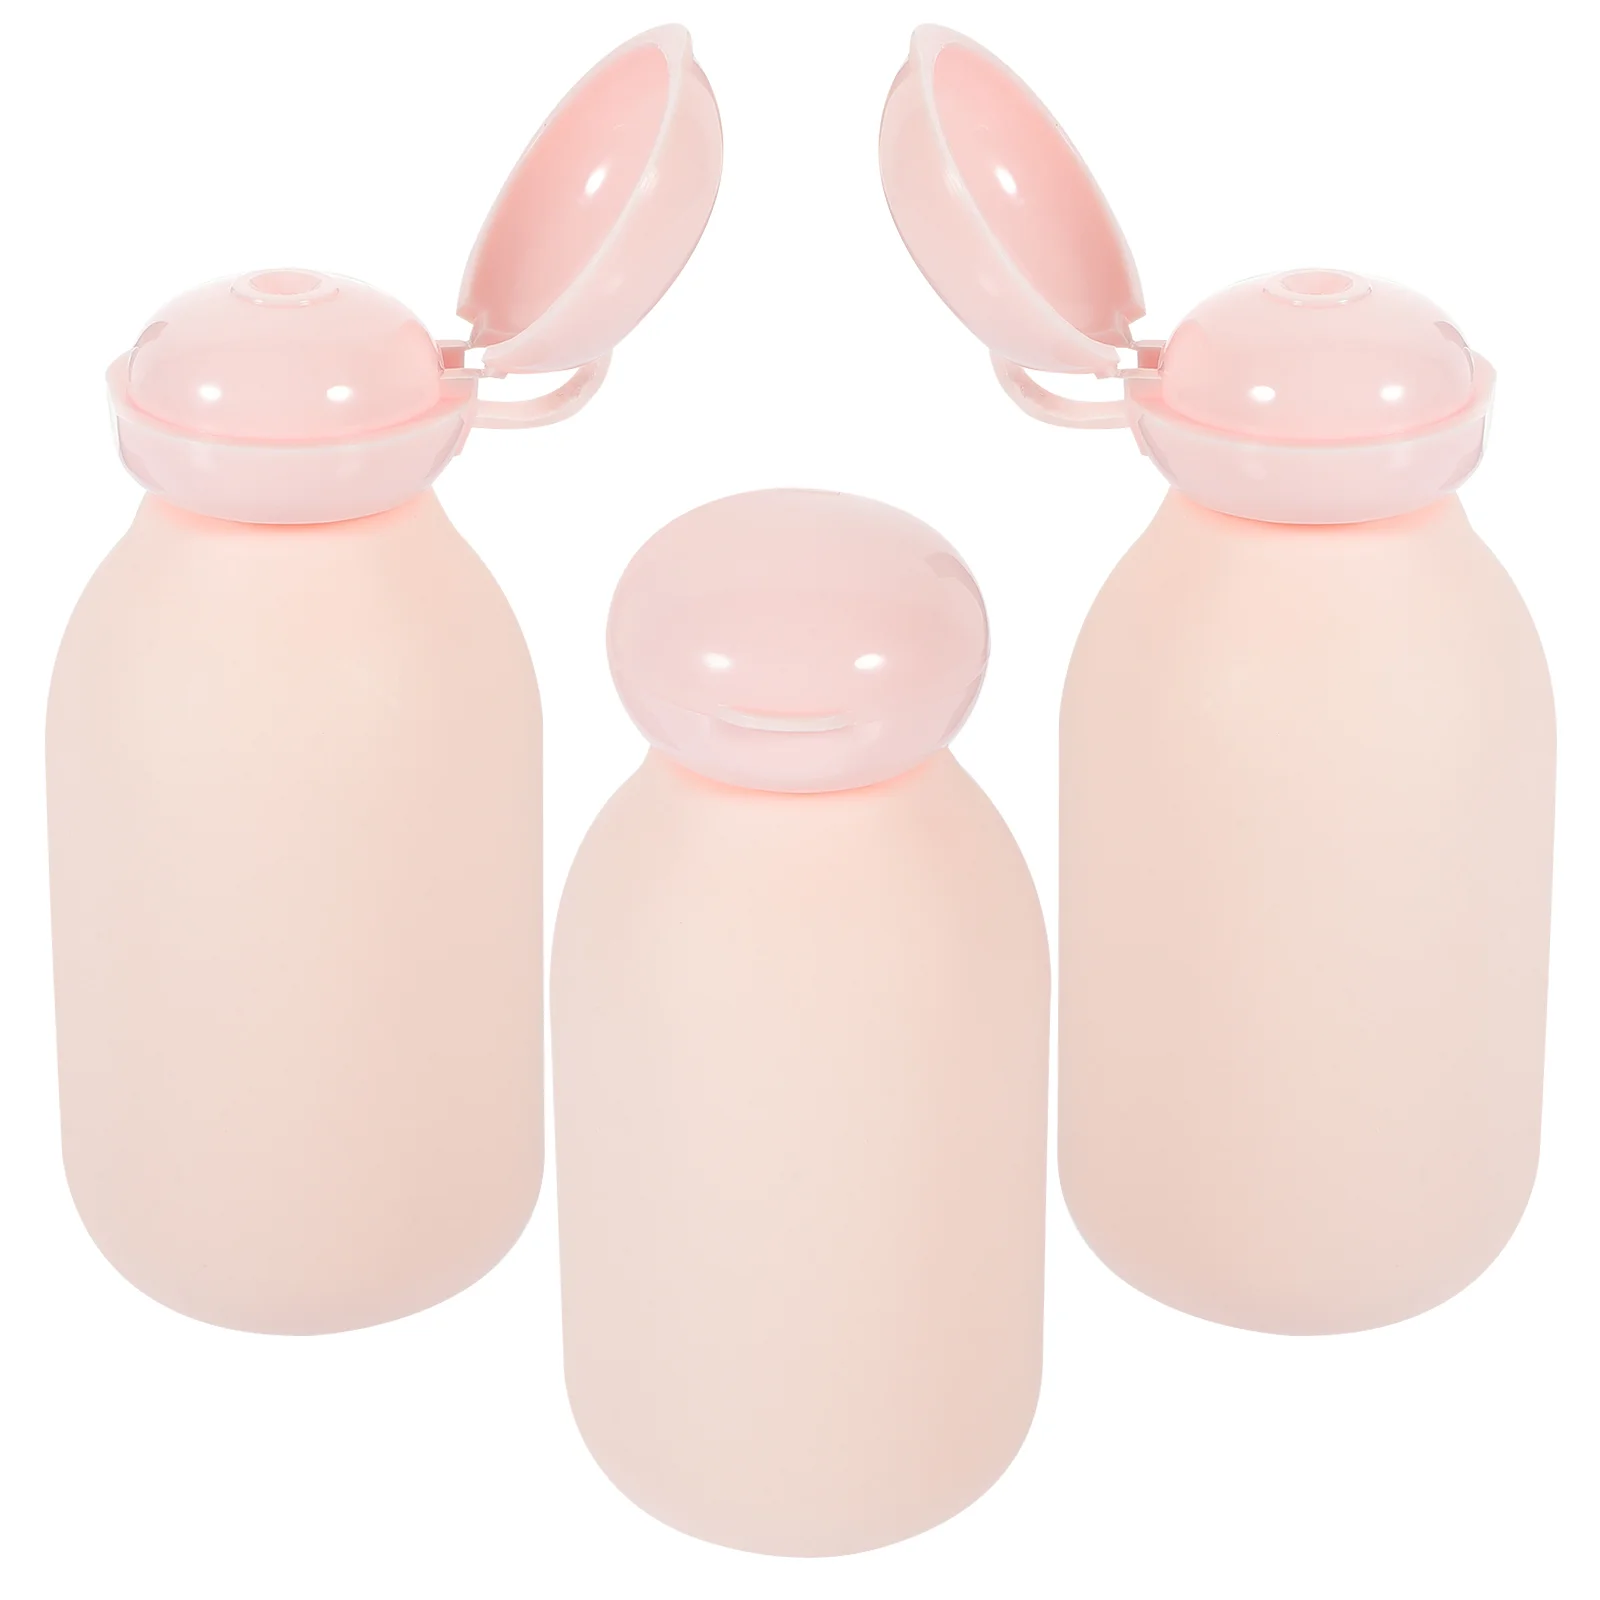 

3 Pcs Squeeze Bottle Travel Bottles Size Containers Bottled Lotion Shampoo or Small Refillable for Toiletries